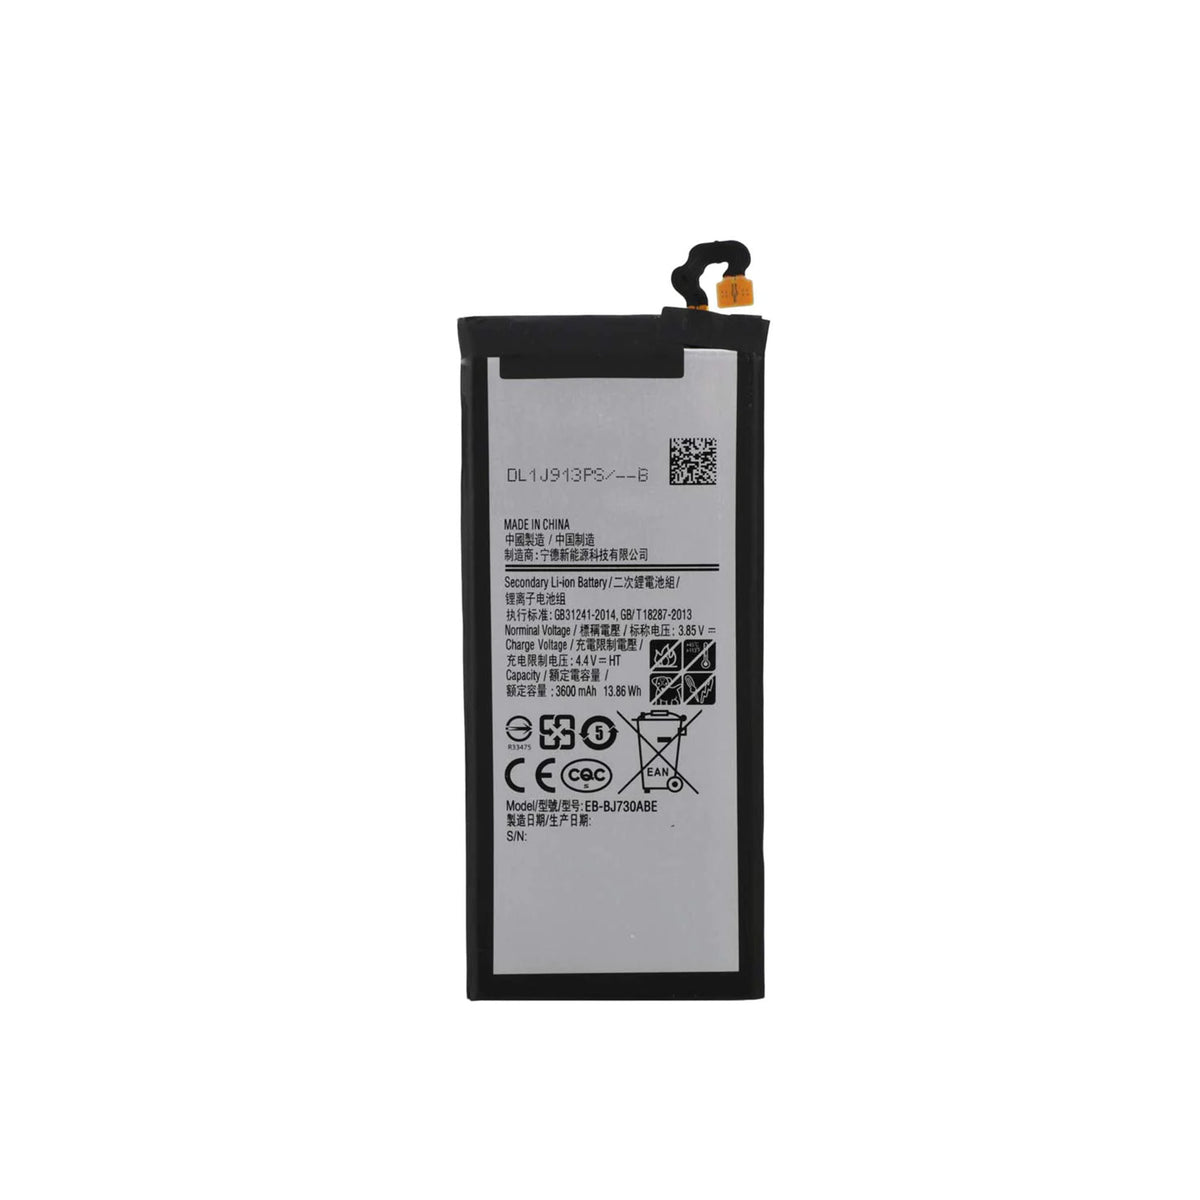 MOBILE BATTERY FOR SAMSUNG GALAXY J7 PRO - J730GM